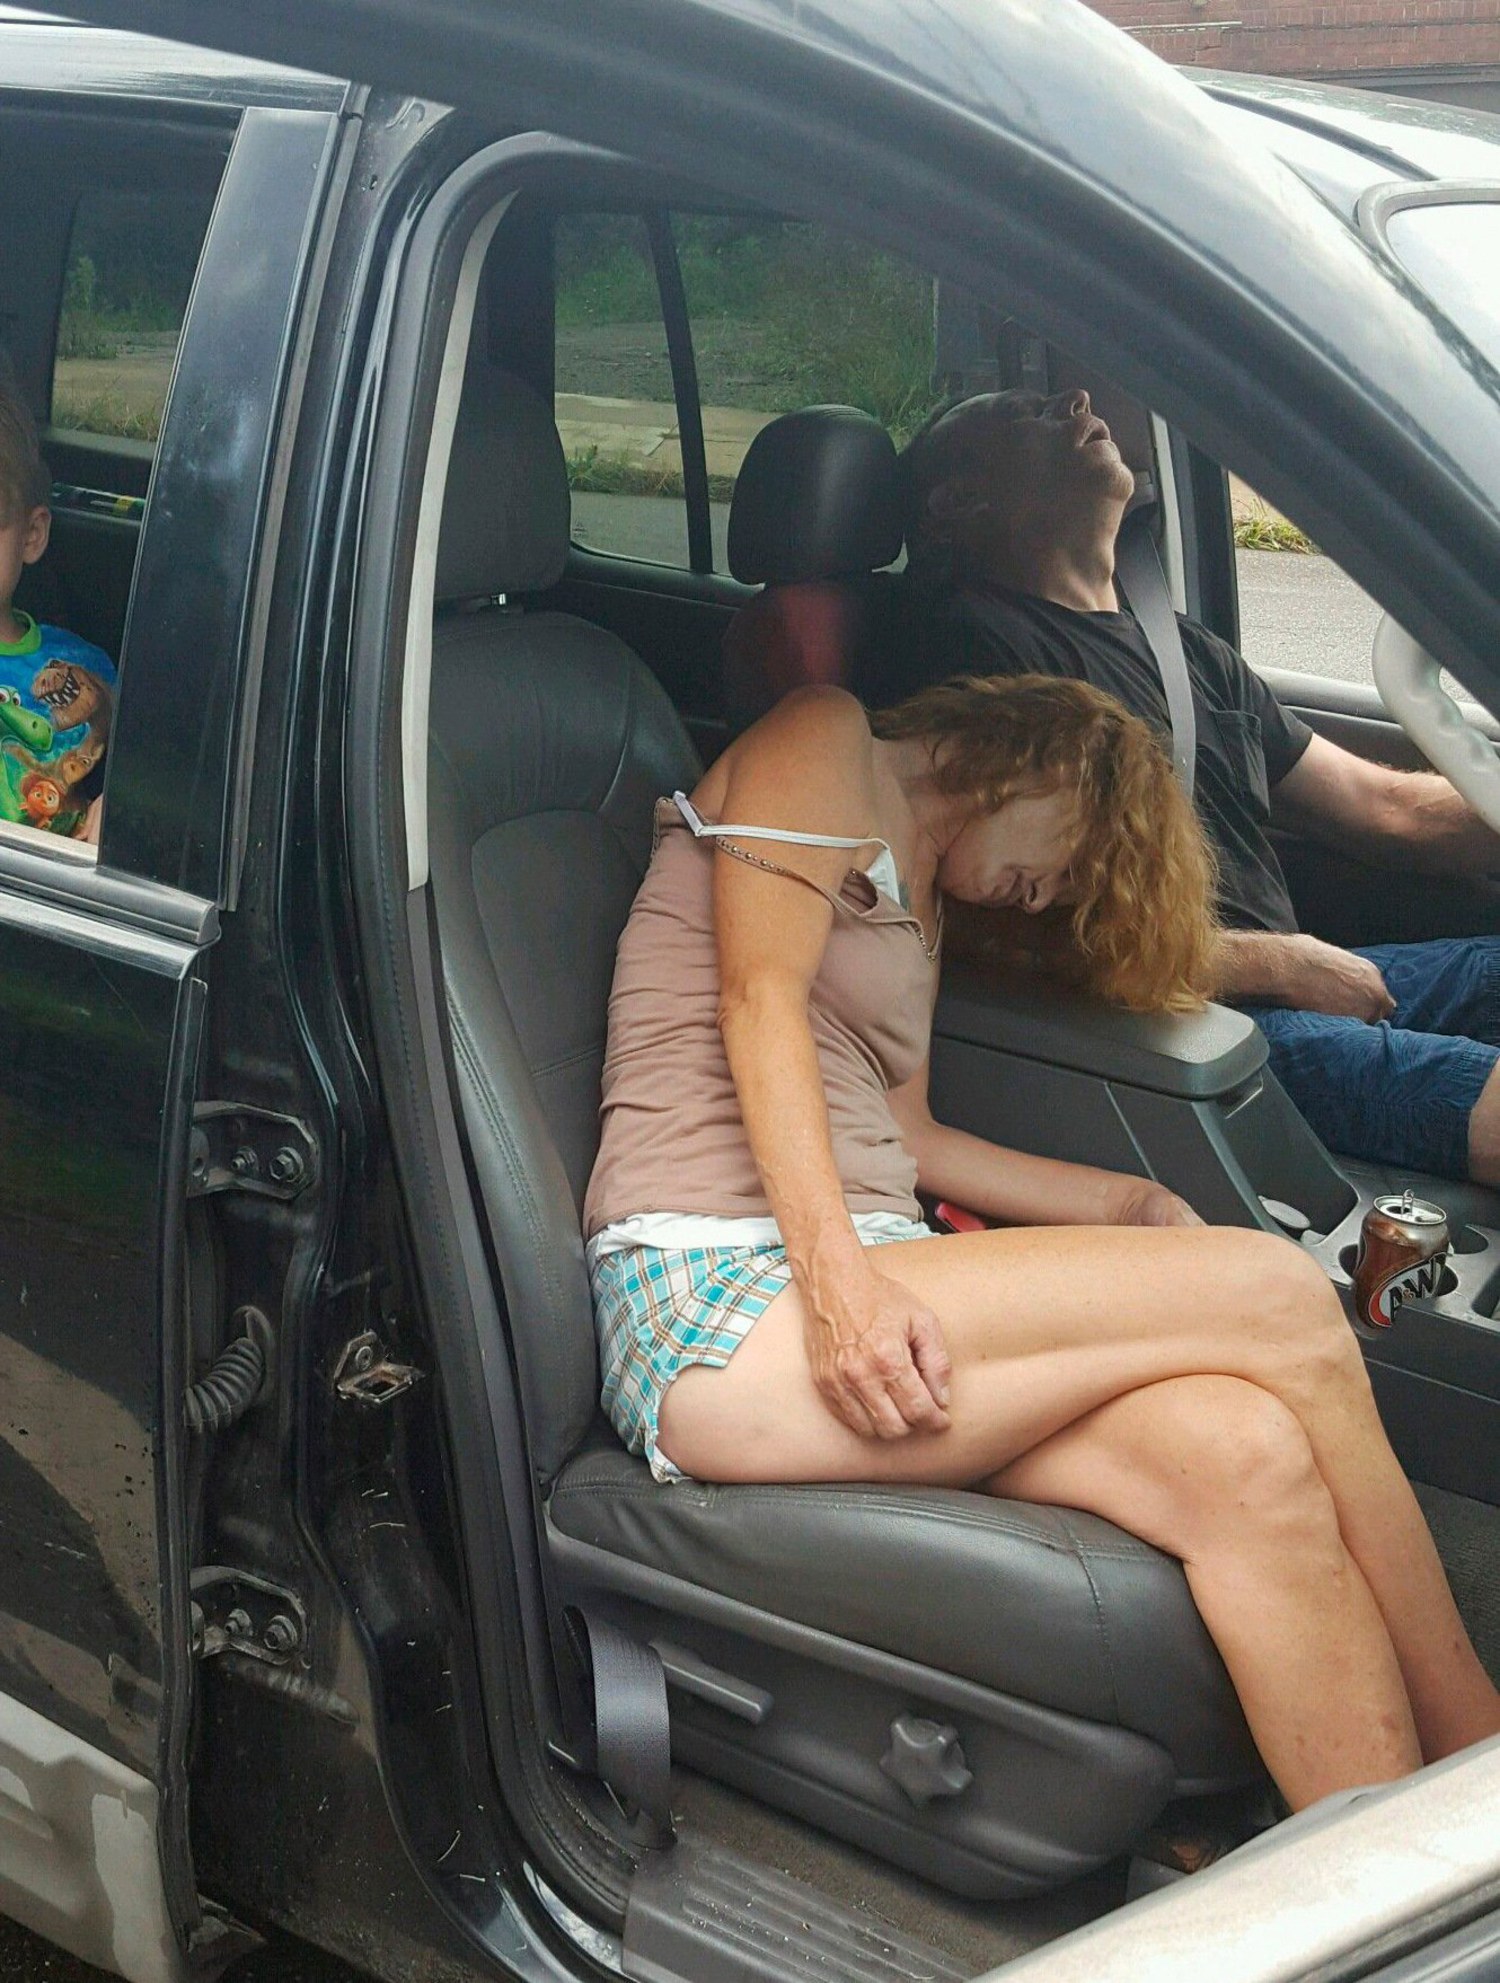 Boy in Shocking Ohio 'Heroin' Picture Heading to New Home